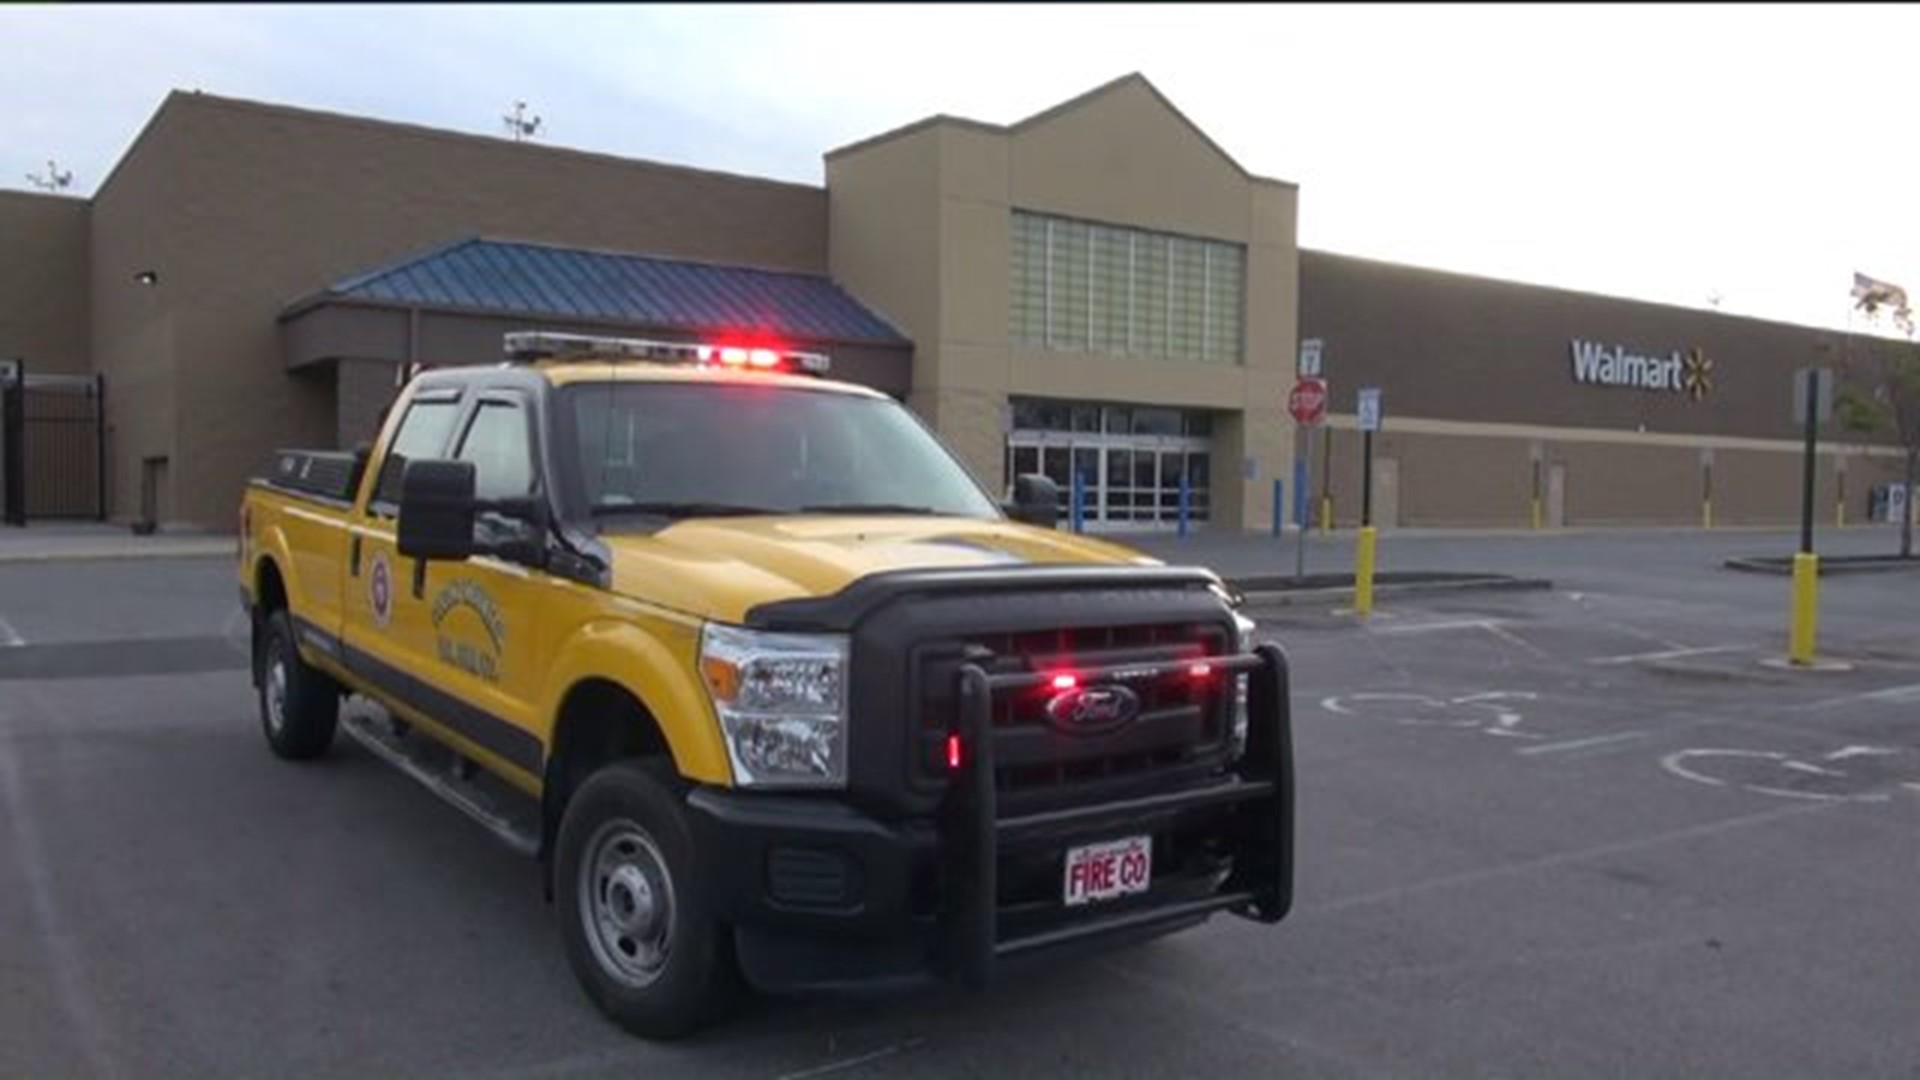 Fire at Wal-Mart Store in Monroe County